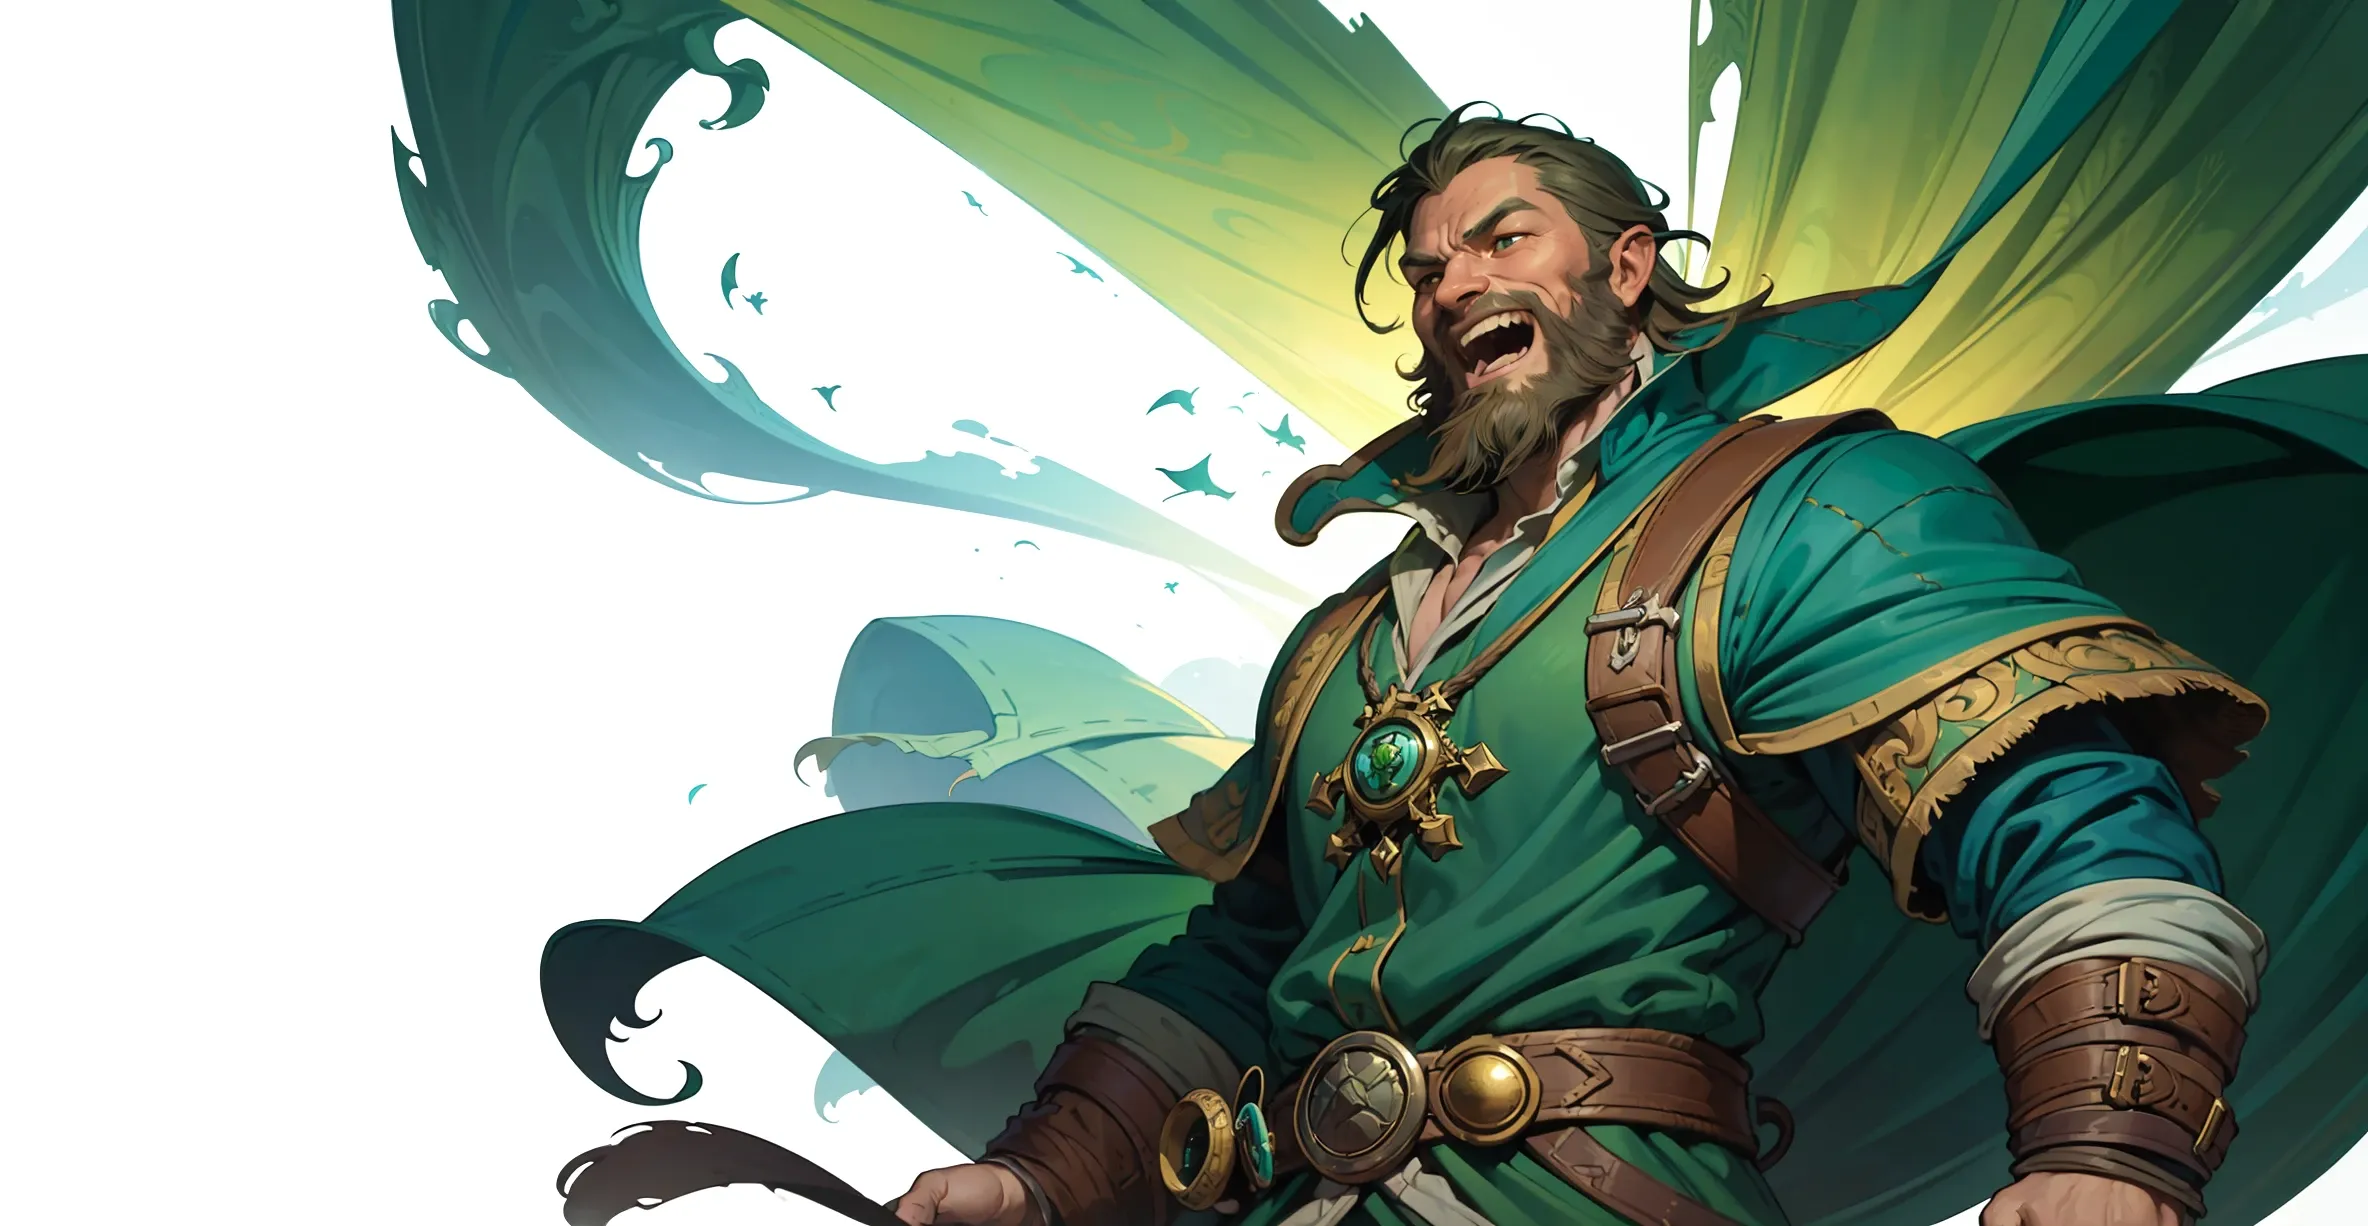 Green pirate warlord laughing in an epic way, fantasy theme, white empty background